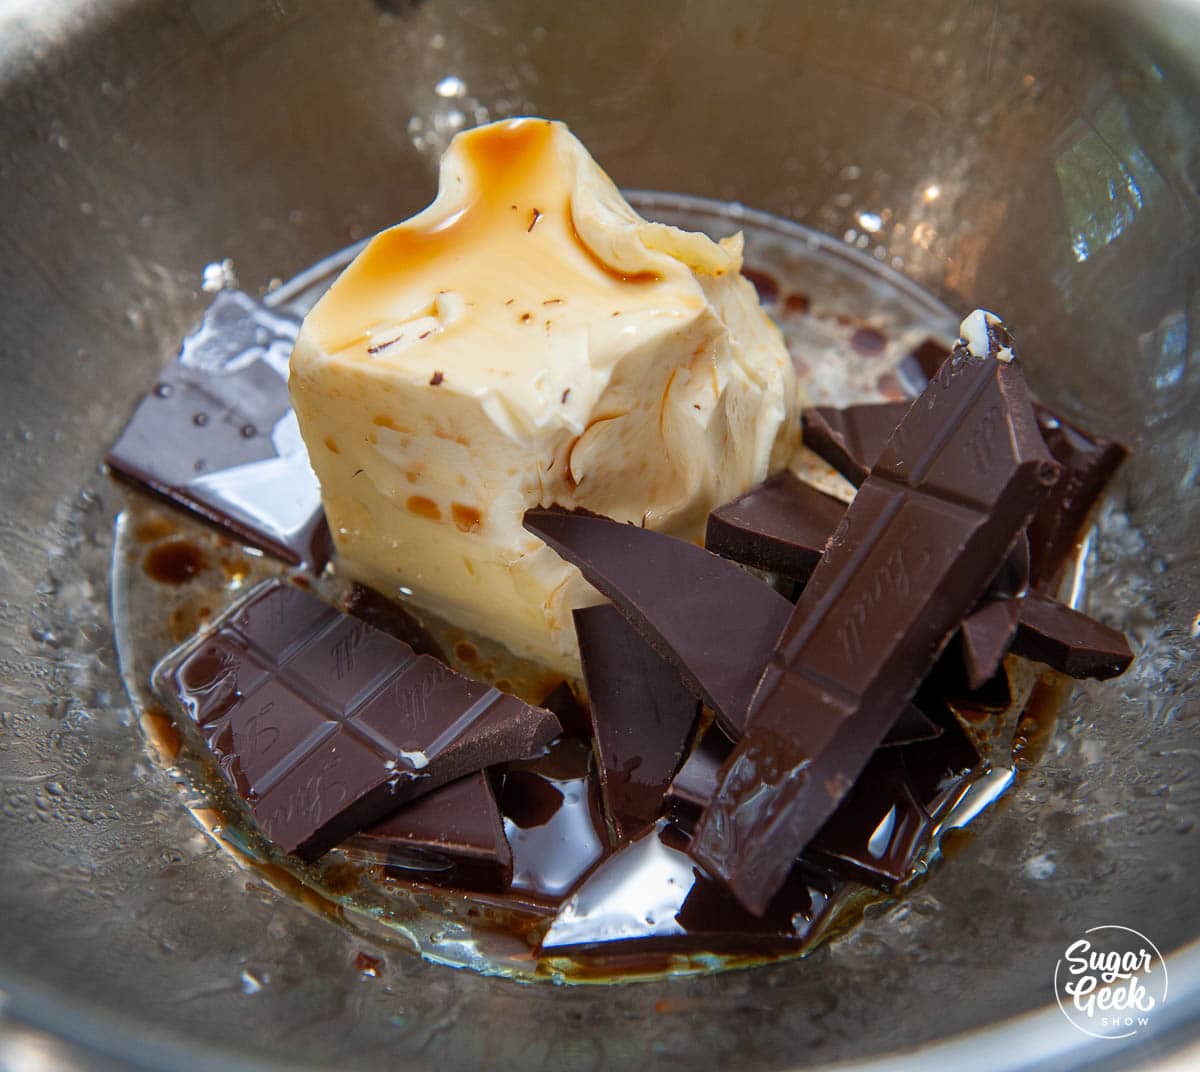 butter, oil and chocolate on a bain marie